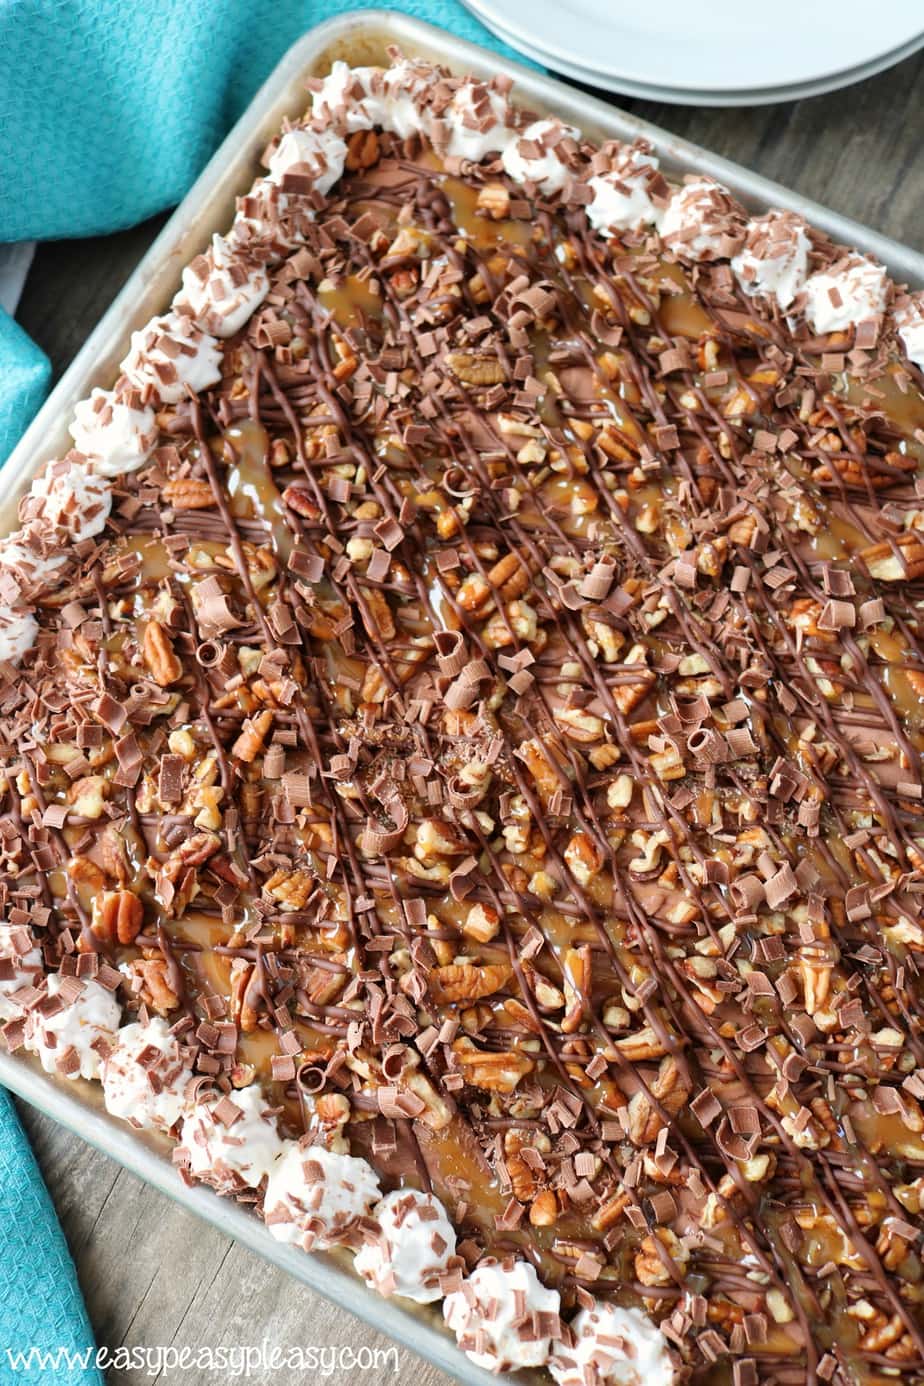 This Chocolate Turtle Slab Pie recipe is the perfect dessert to feed a crowd.